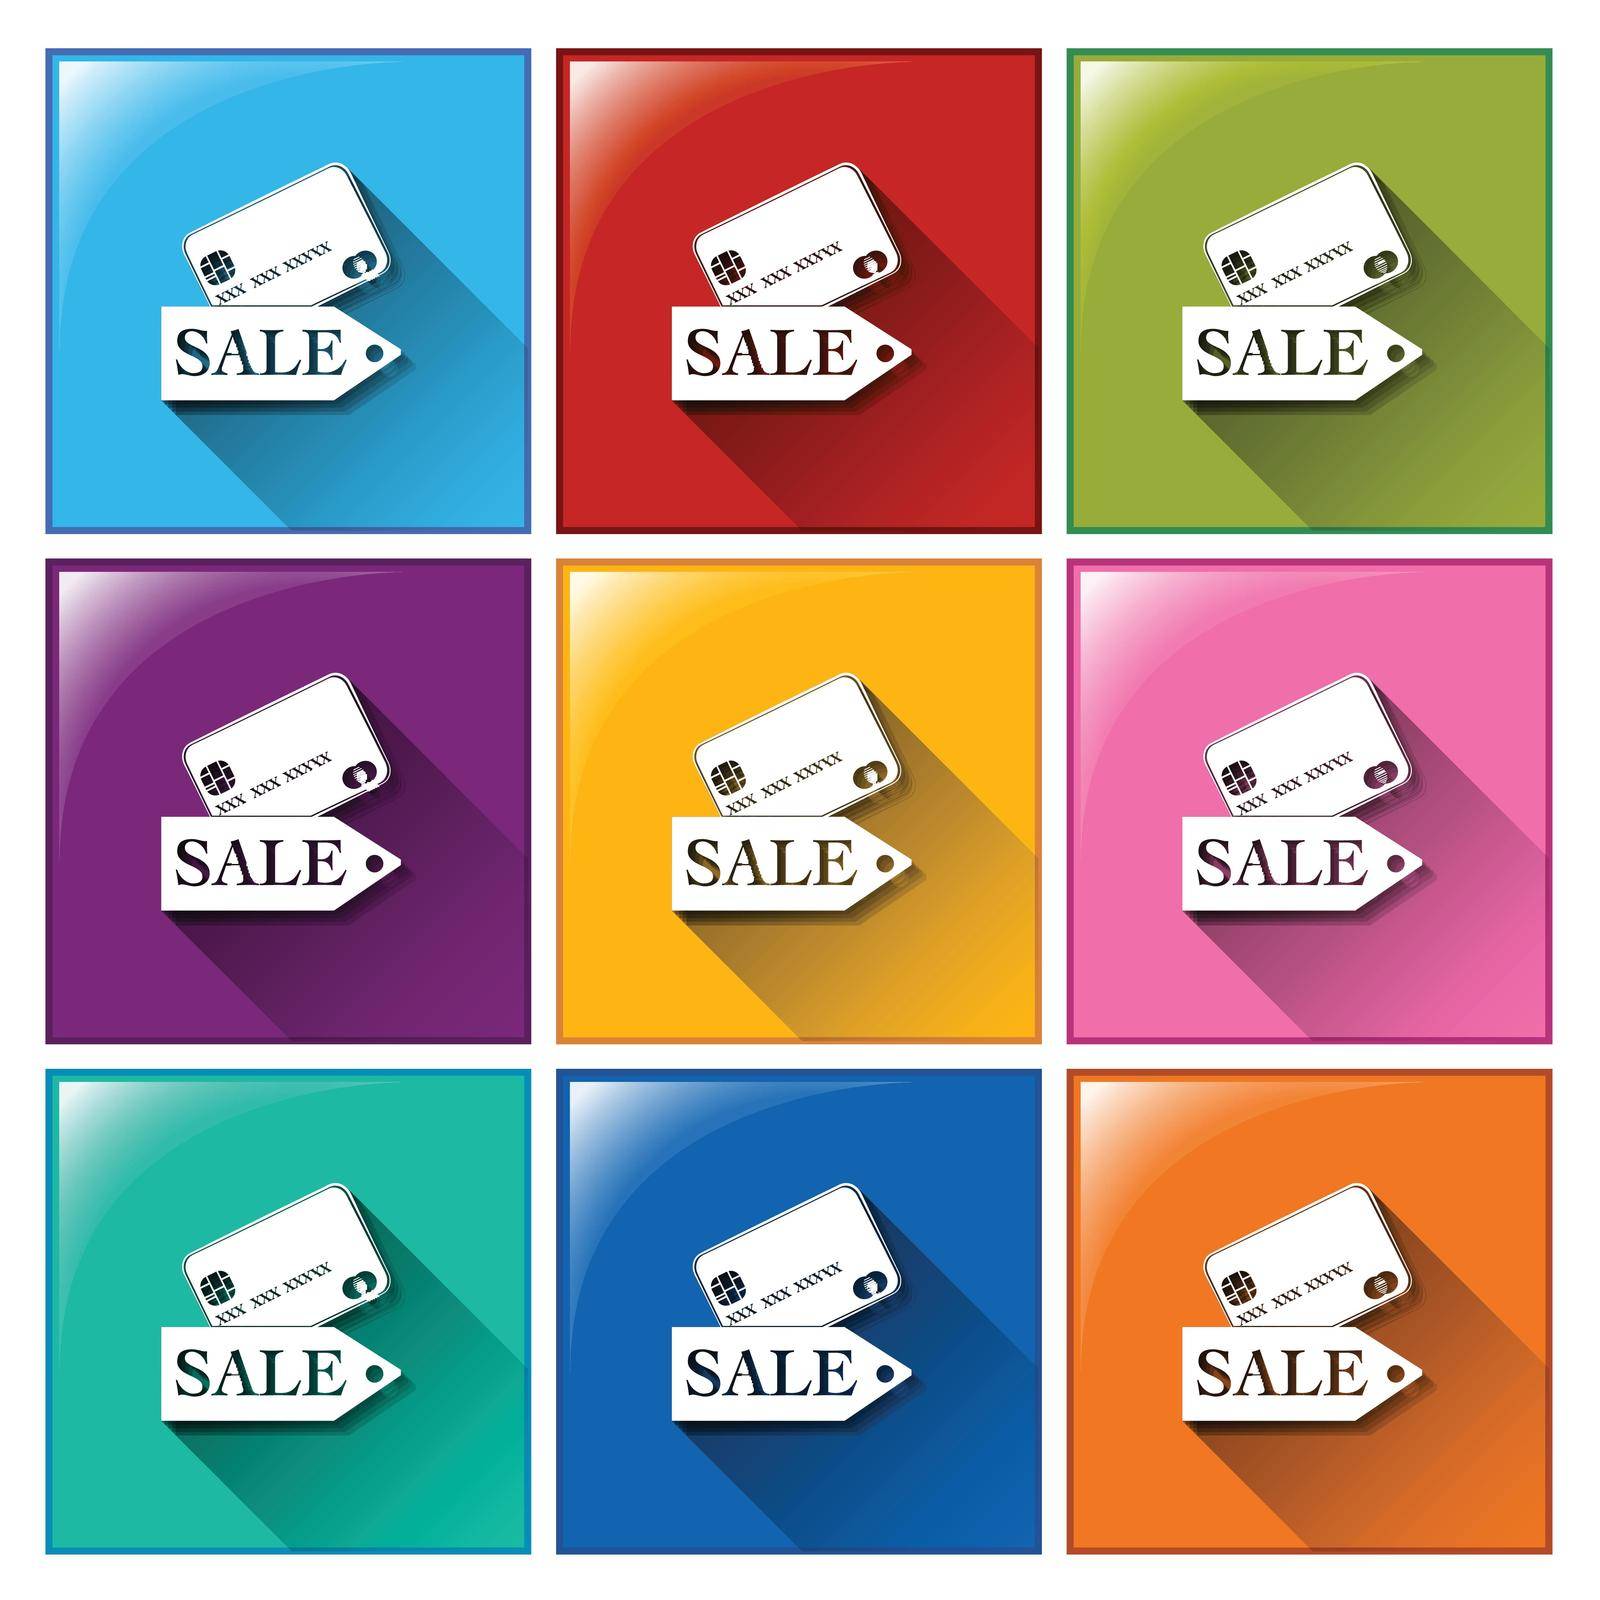 Illustration of the sale icons on a white background